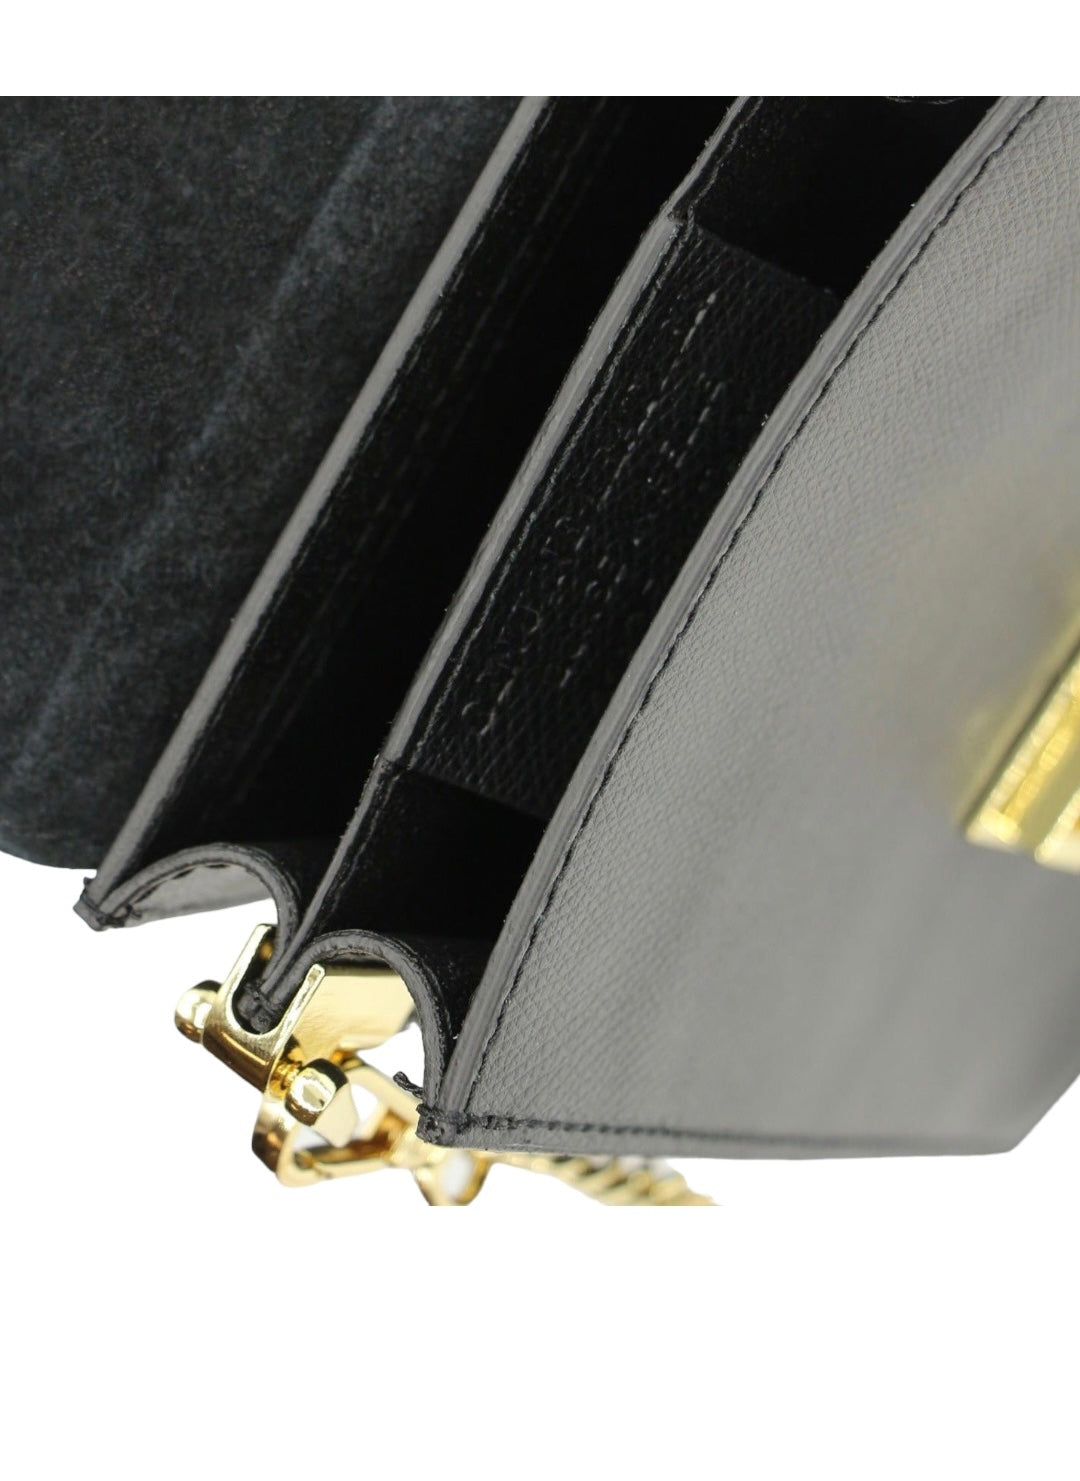 Elegant Evening Bag in black, crafted from real leather and adorned with calf hair for a touch of luxury. The bag showcases timeless sophistication, with a secure button closure and a golden shoulder strap adding a glamorous touch. The dual compartments inside offer practical organization for essentials, making it perfect for important evenings